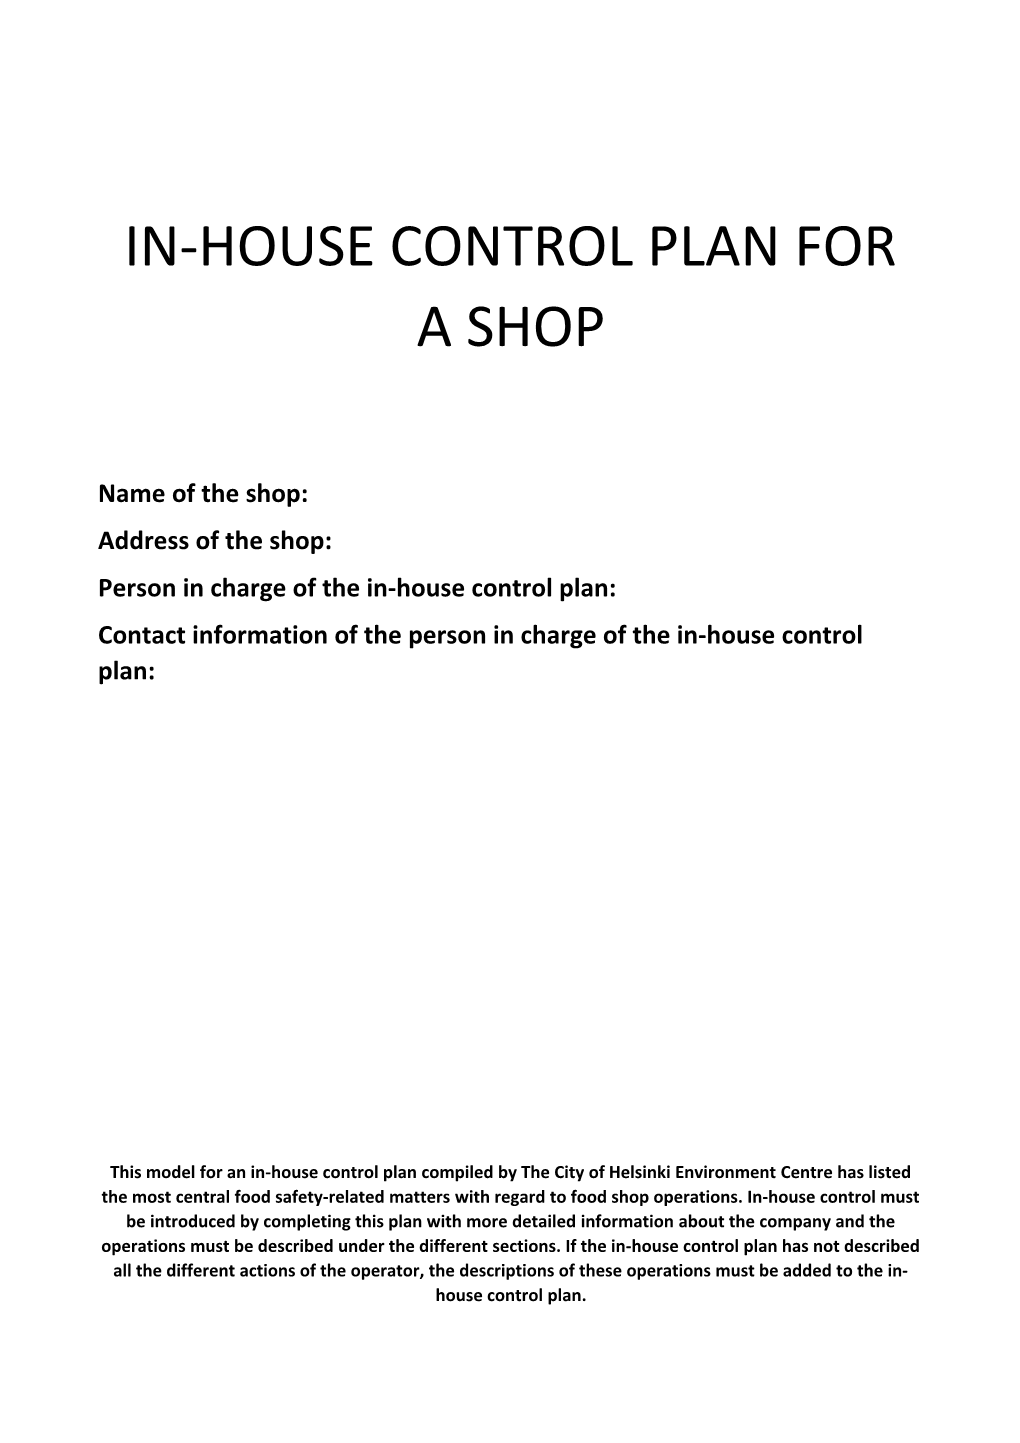 In-House Control Plan for a Shop